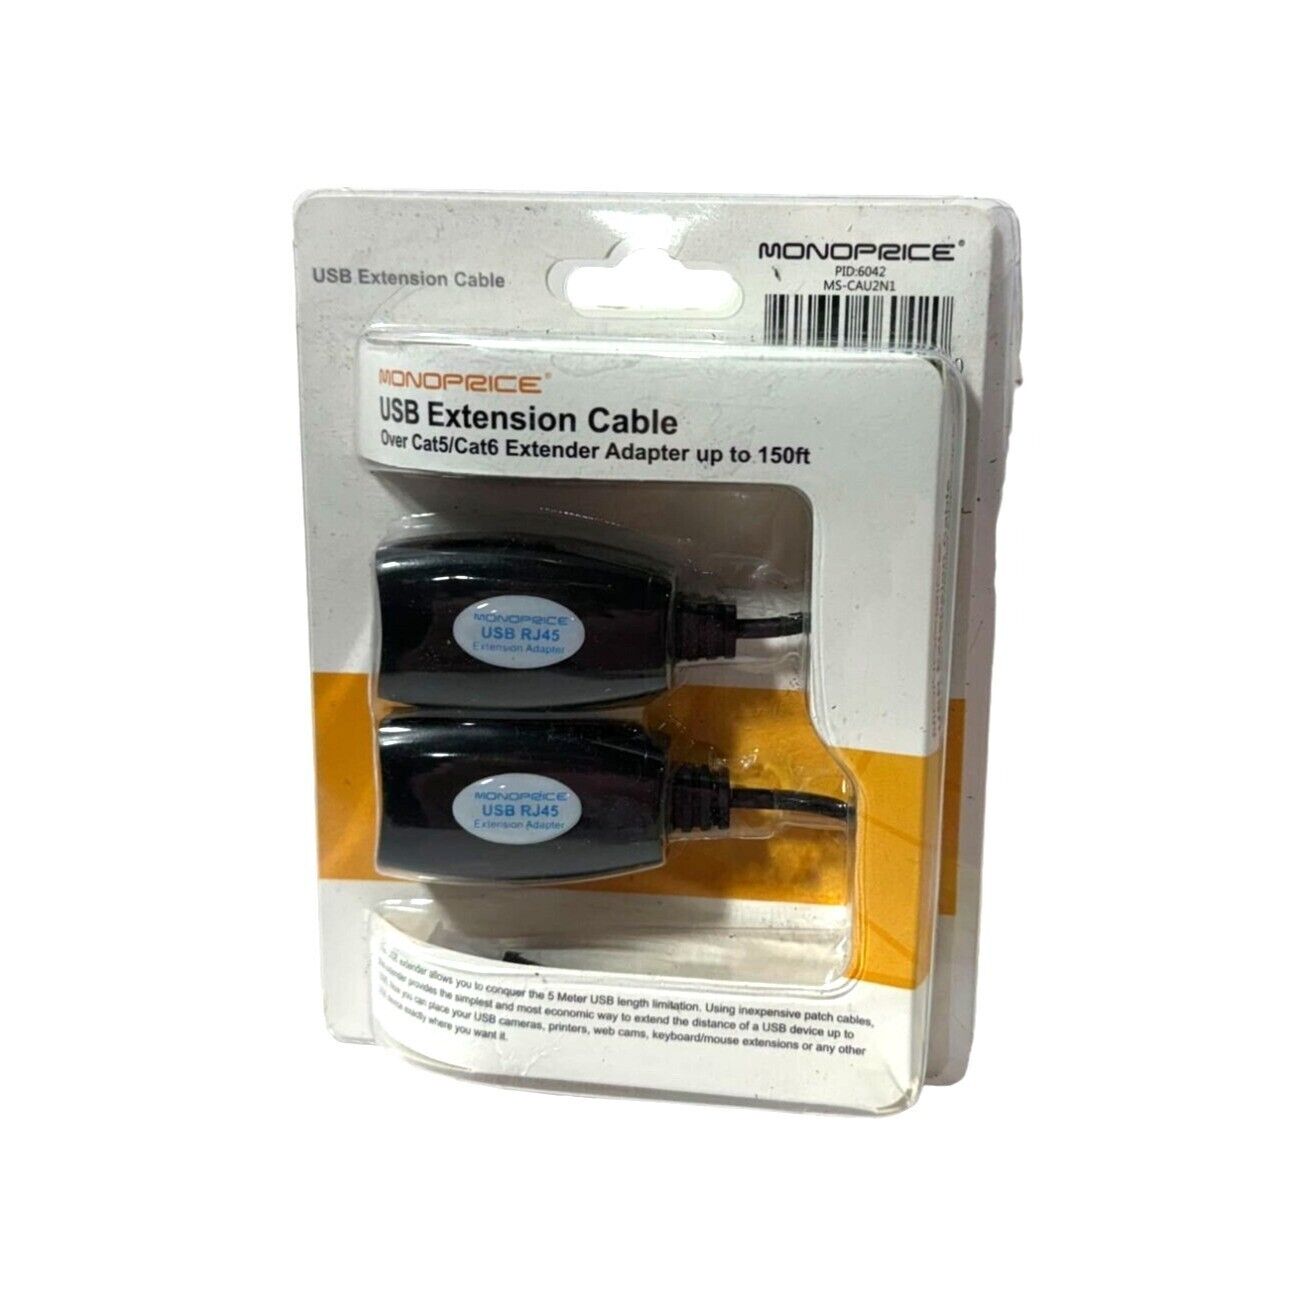 Brand-New Monoprice USB Extension Cable | Extend USB Reach Up to 150 FEET